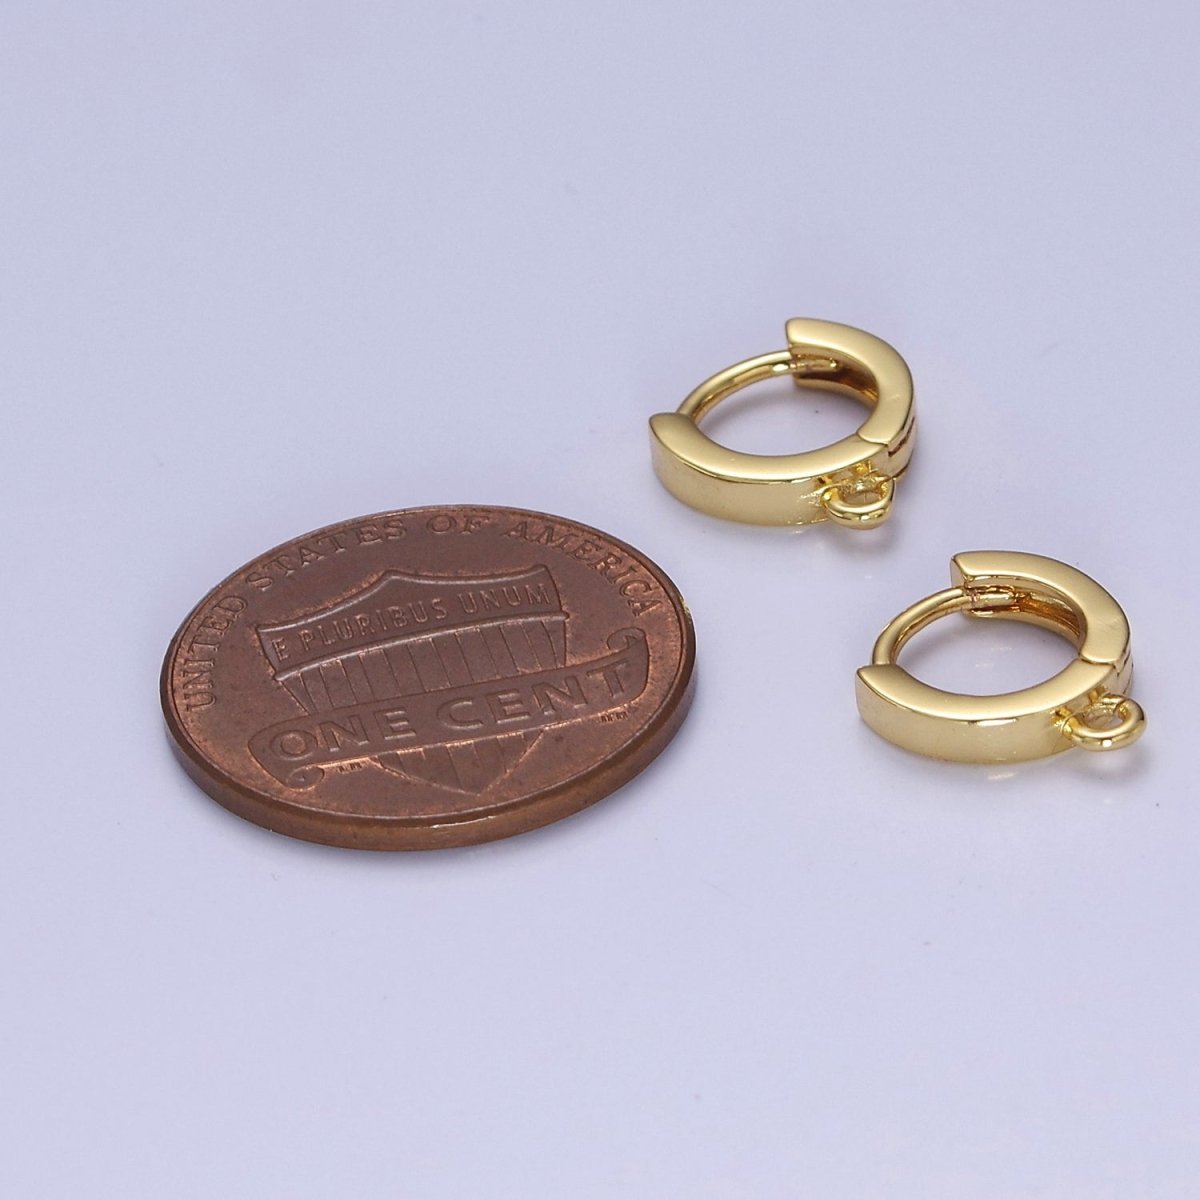 Gold Filled Earring Hoops Lever Back one touch w/ open link Lever Hoop earring Nickel free Lead Free for Earring Charm Making Findings L-734 - DLUXCA